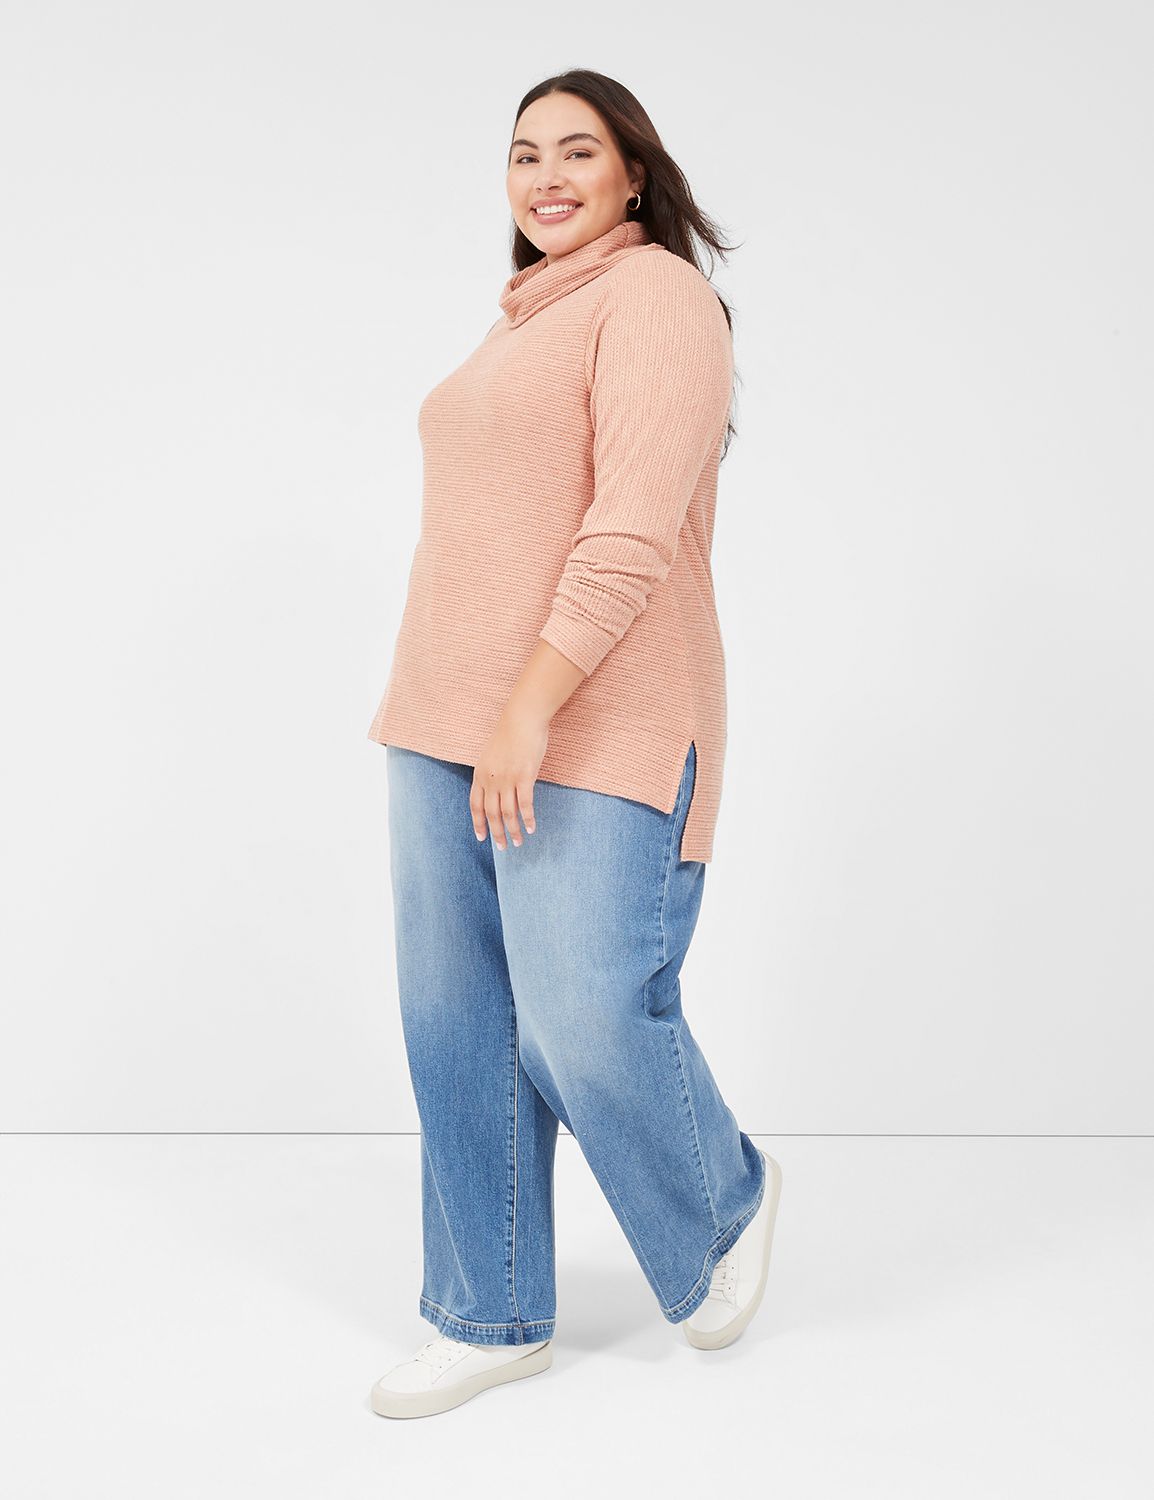 Classic Long Sleeve Snood Neck Cabl | LaneBryant